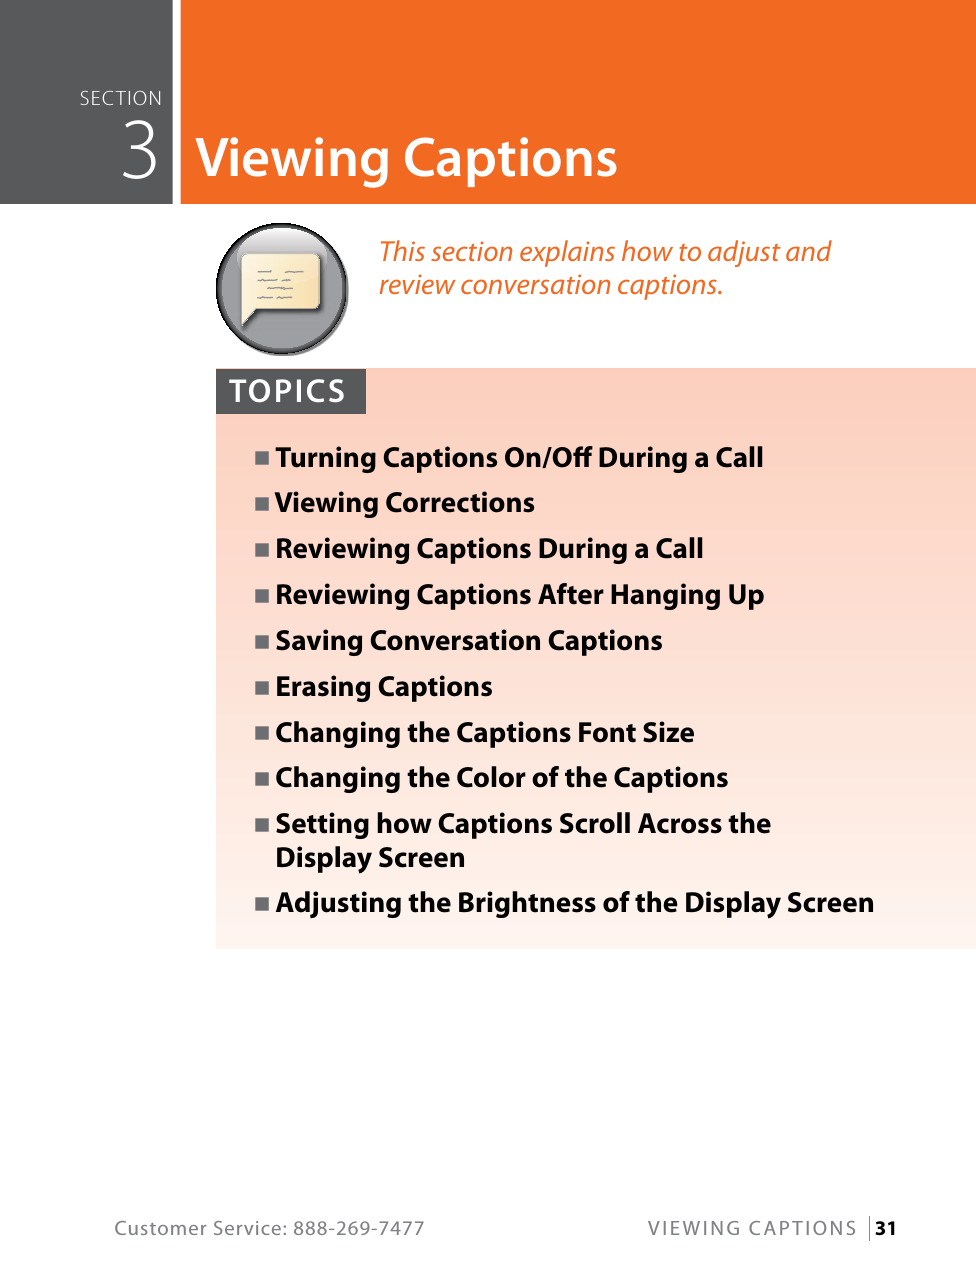 Customer Service: 888-269-7477  VIEWING CAPTIONS   31This section explains how to adjust and  review conversation captions.TOPICSN Turning Captions On/O During a CallN Viewing CorrectionsN Reviewing Captions During a CallN Reviewing Captions After Hanging UpN Saving Conversation CaptionsN Erasing CaptionsN Changing the Captions Font SizeN Changing the Color of the CaptionsN  Setting how Captions Scroll Across the  Display ScreenN Adjusting the Brightness of the Display ScreenseCTiOn  3Viewing Captions